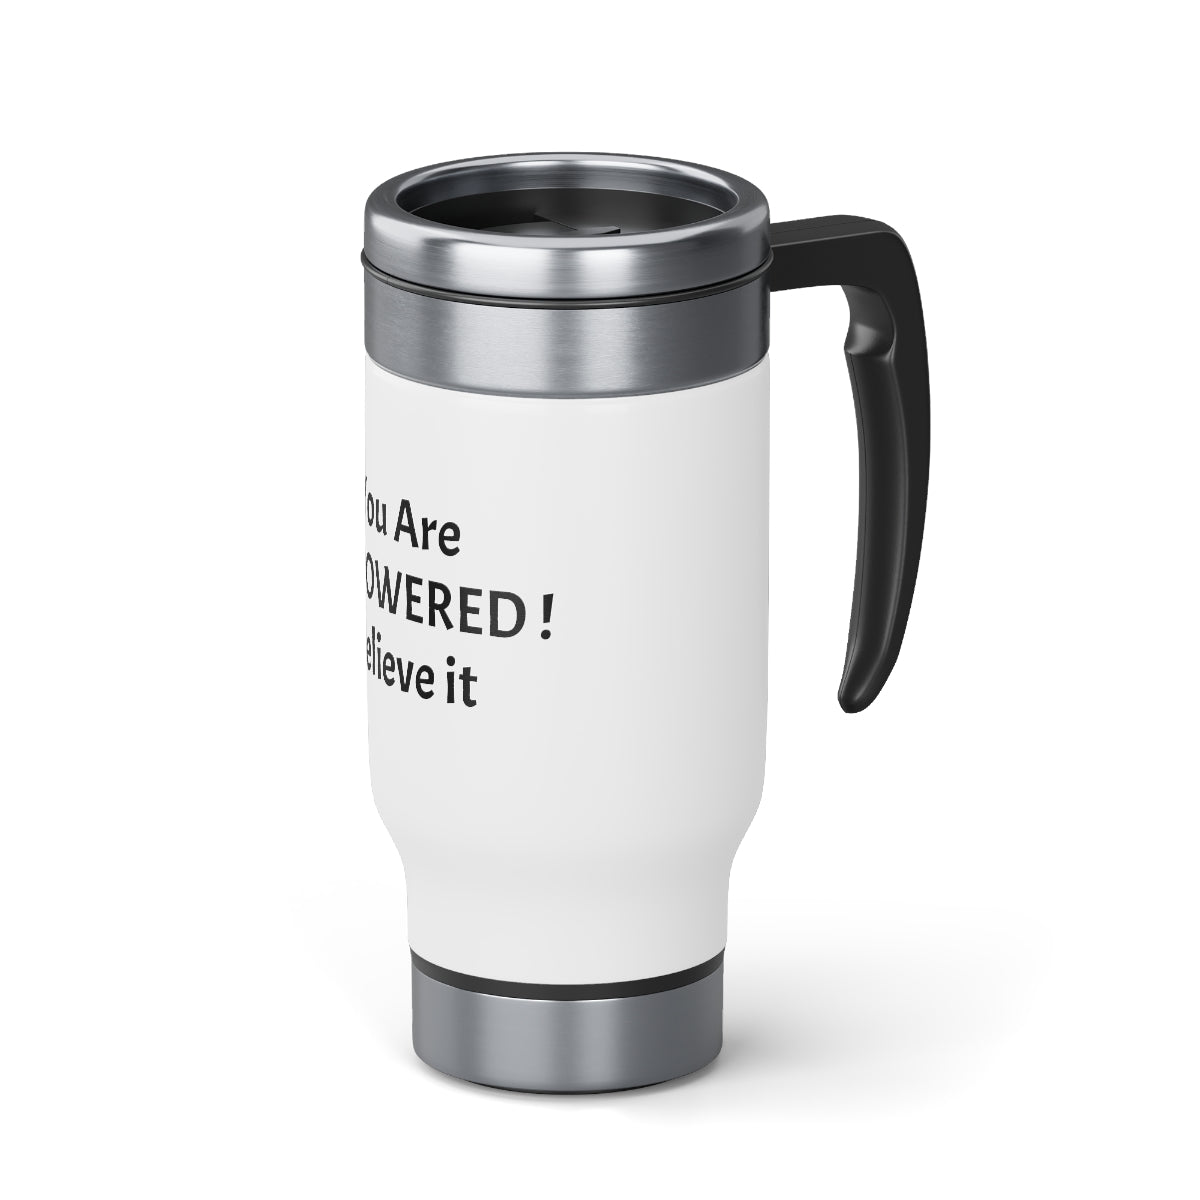 You Are Empowered! Stainless Steel Travel Mug with Handle, 14oz